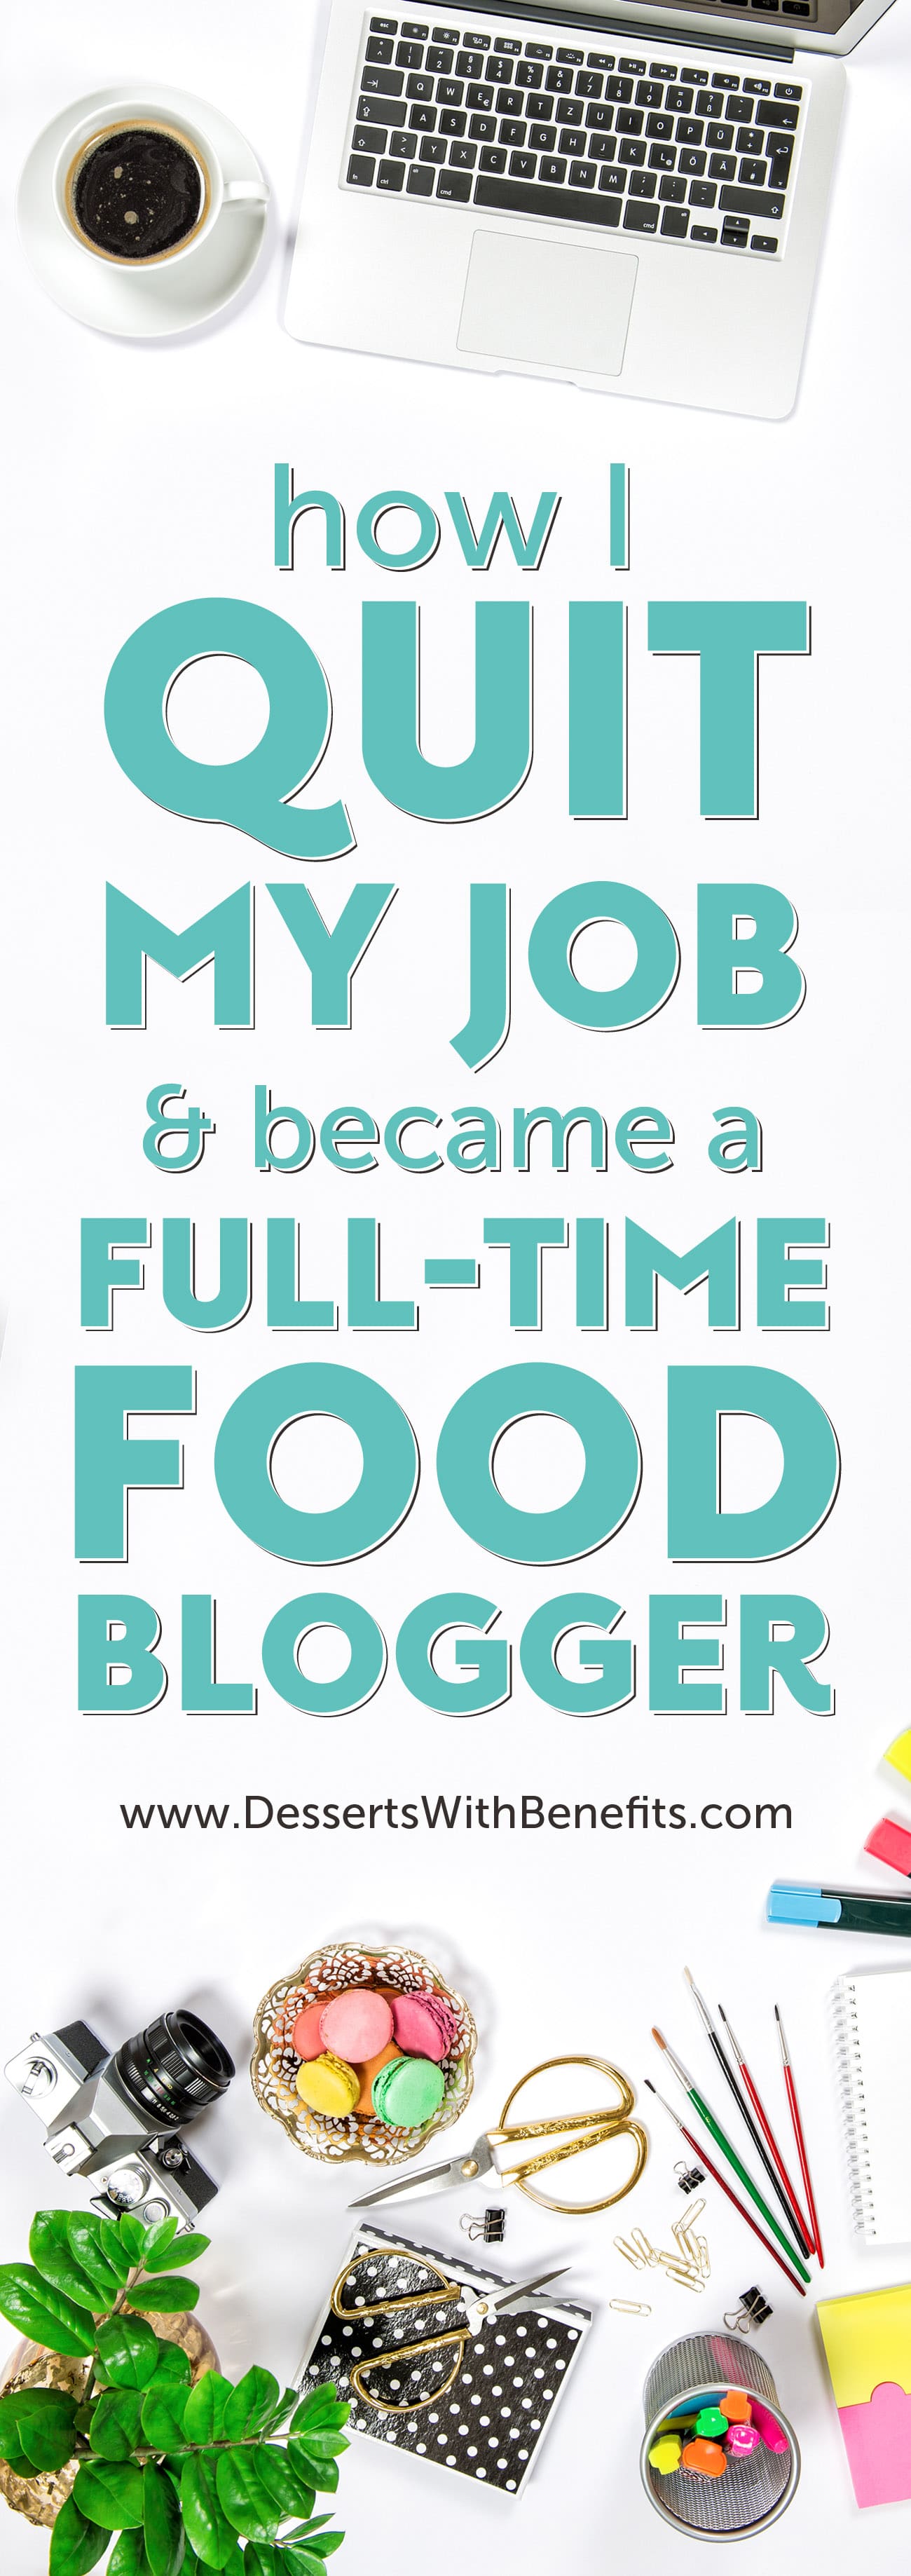 Full Time Blogging is a career? Oh yes. Here is the ULTIMATE guide to food blogging -- tools, resources, and helpful hints and tips that allowed me to quit my day job and turn my blog from a side hustle to my main hustle! Healthy Dessert Recipes at the Desserts With Benefits Blog (www.DessertsWithBenefits.com)